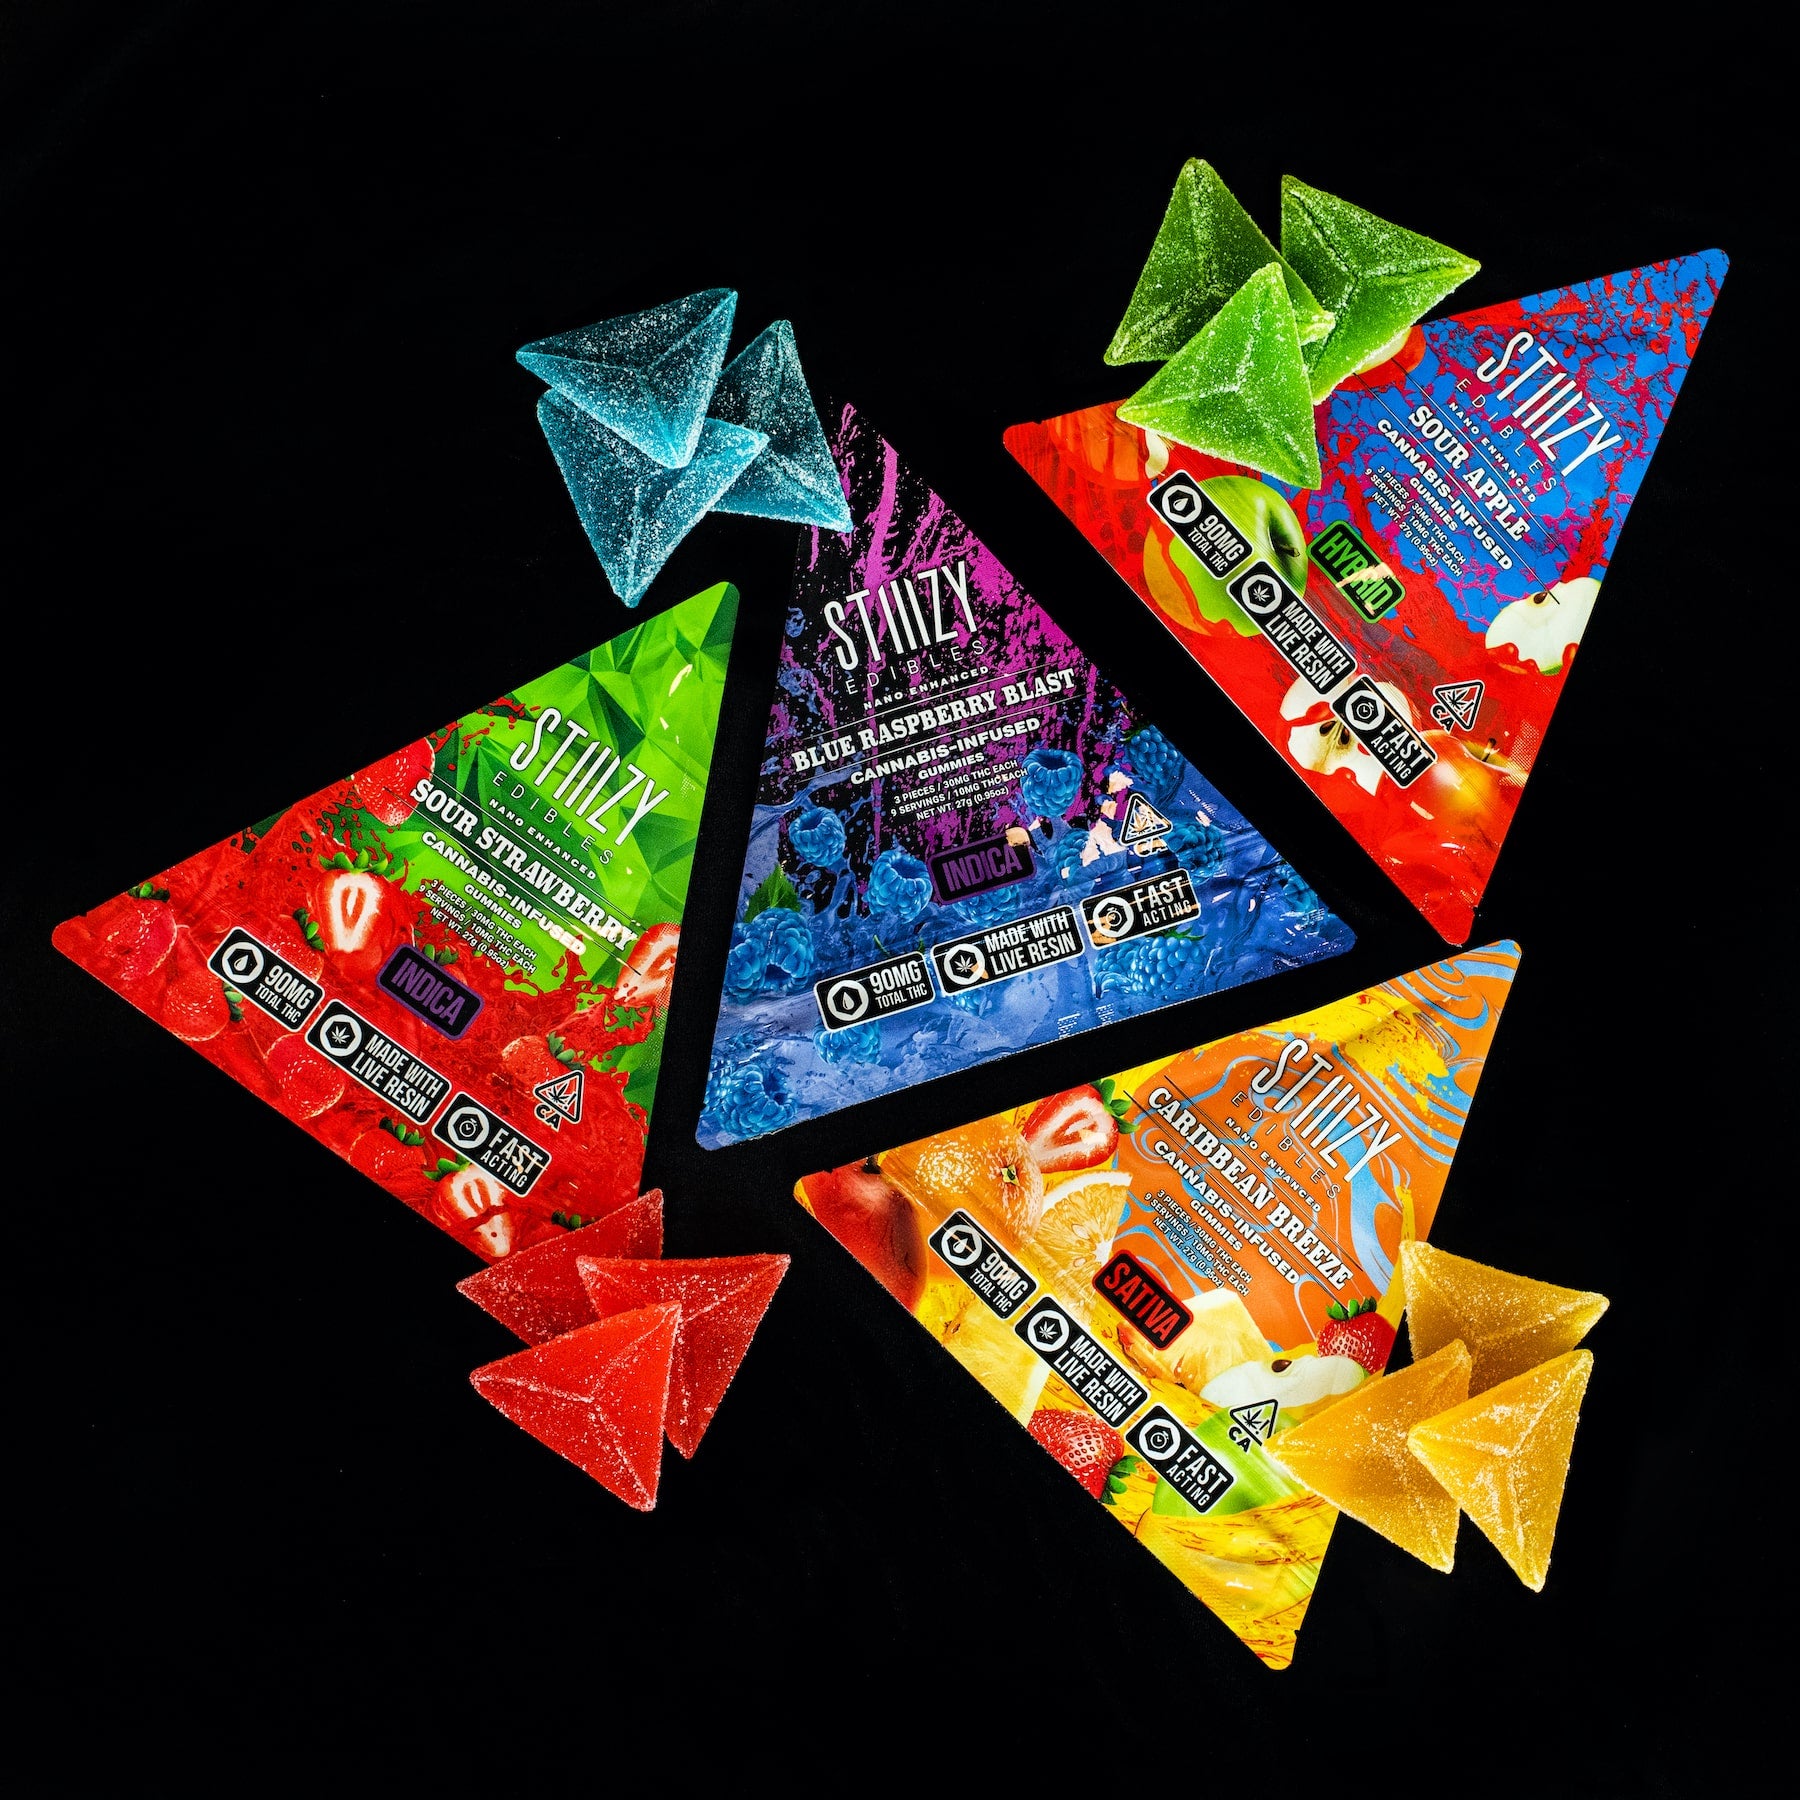 INTRODUCING OUR NEWEST LINE OF FAST-ACTING EDIBLES!